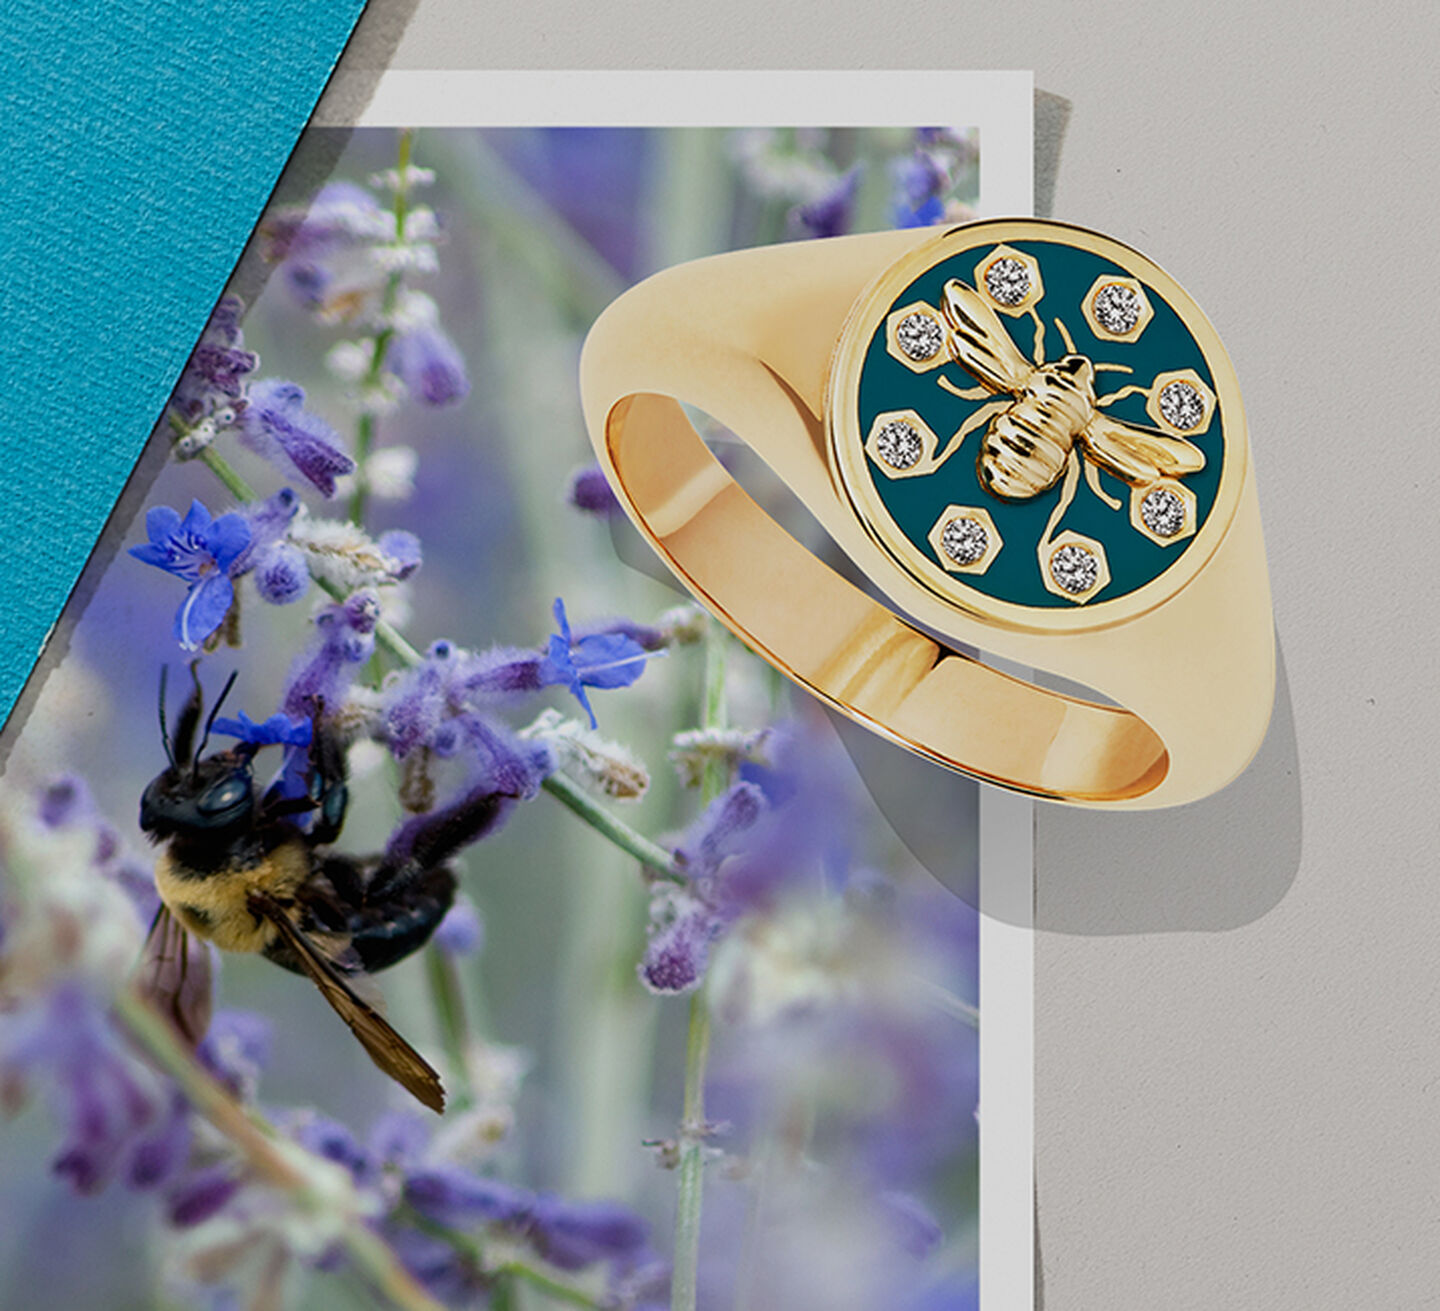 Birks Bee Chic Ring on a picture of a bee